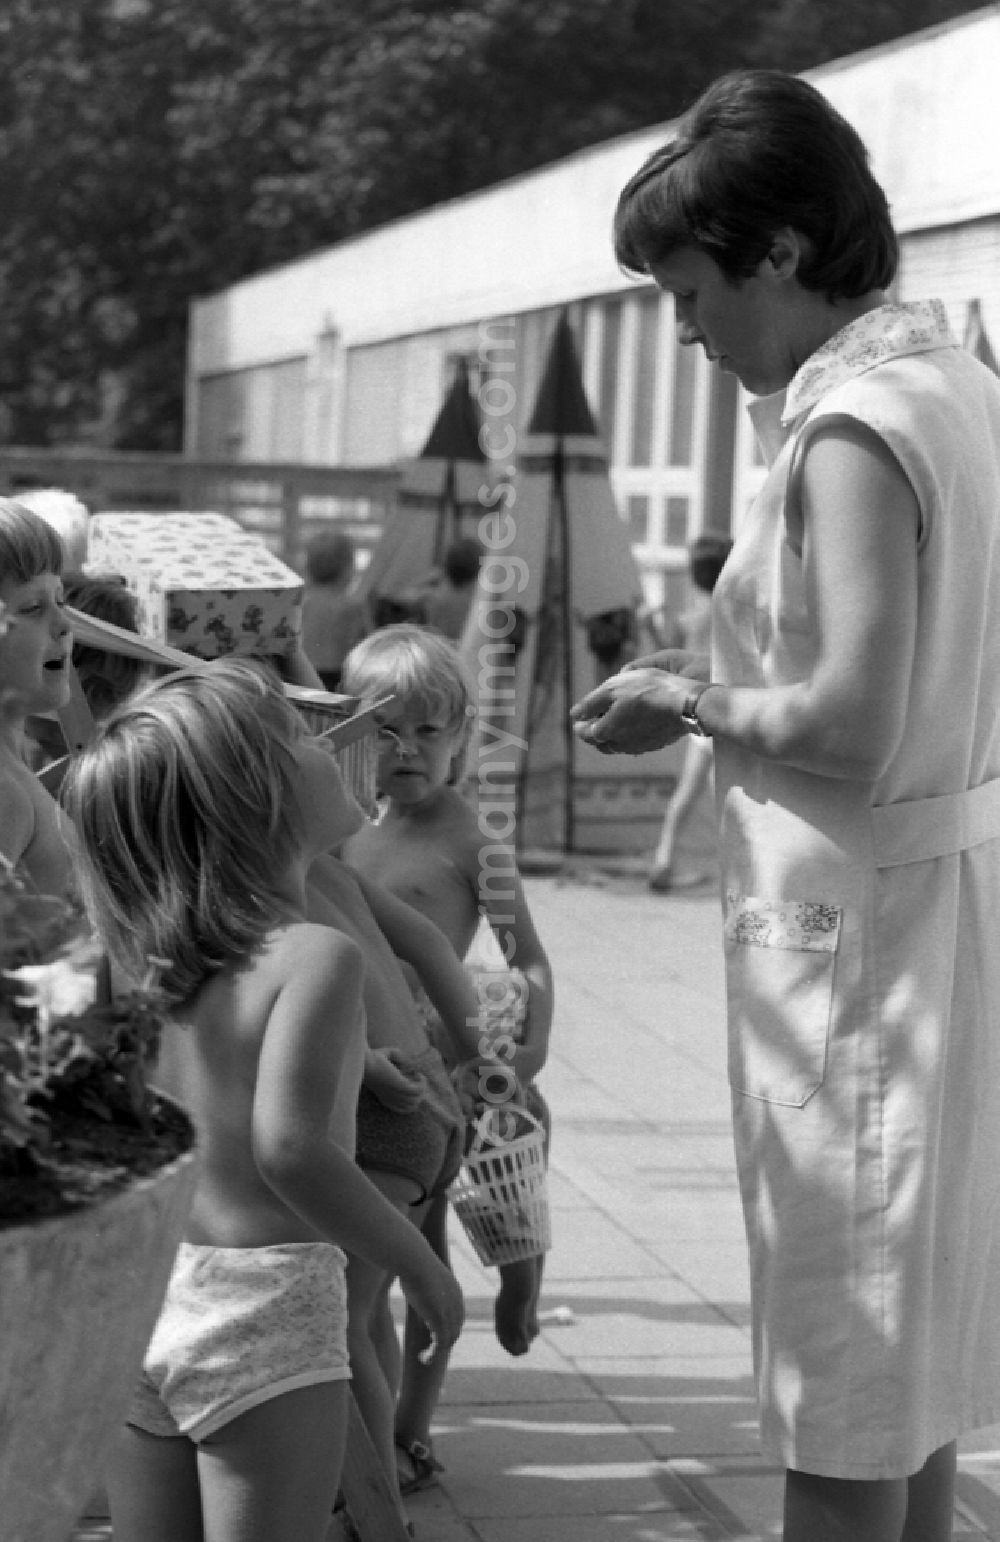 GDR picture archive: Berlin - Summer temperatures while playing and having fun with toddlers cared for by educators in a kindergarten on a playground in Berlin East Berlin on the territory of the former GDR, German Democratic Republic